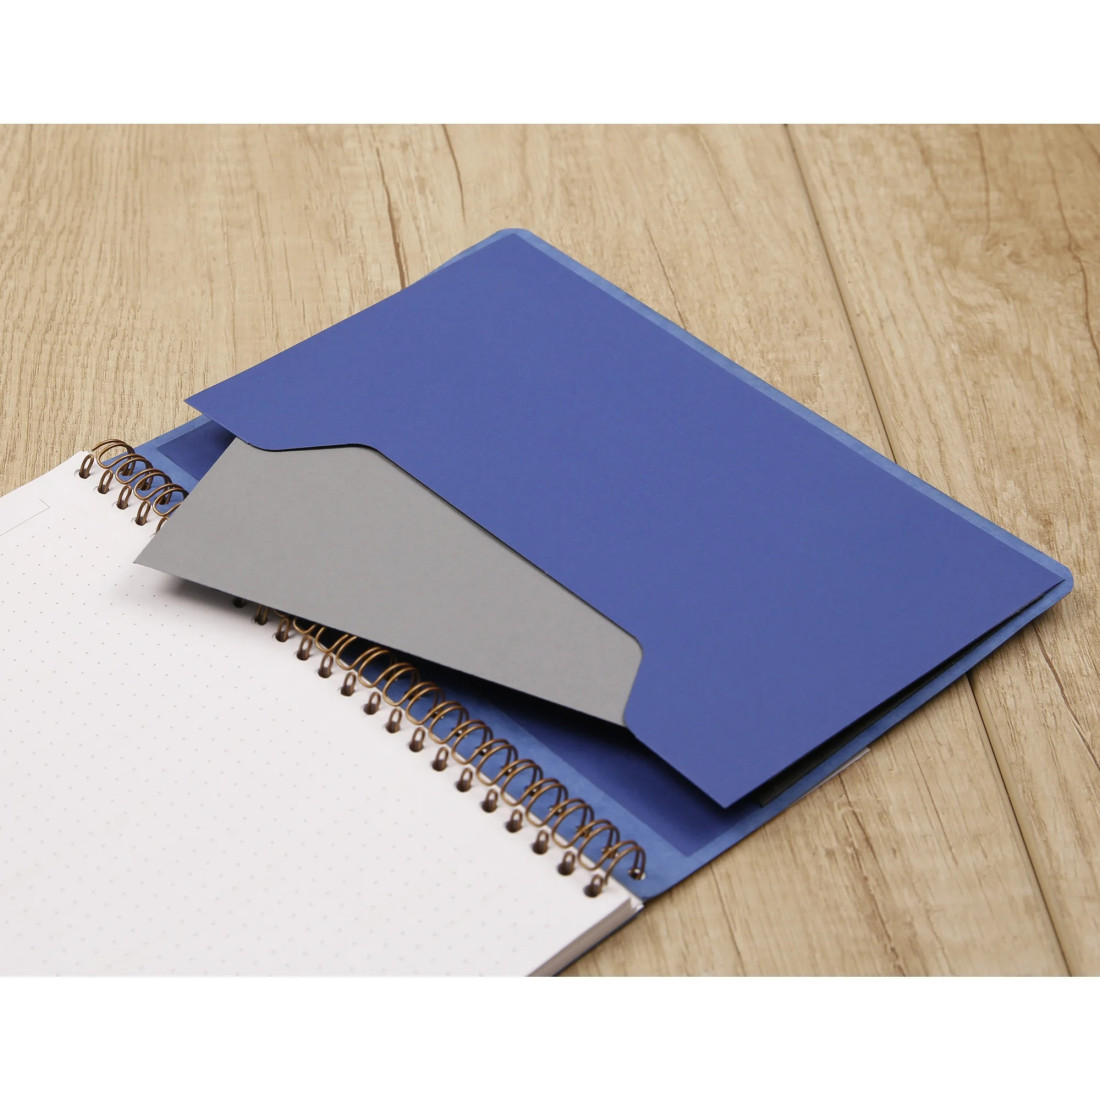 Clairefontaine Rhodia My.Notes Age Bag full-bound notebook with detachable margins A5+, 16x21cm, 120 detachable pages DOT + header frame - Tobacco 78233